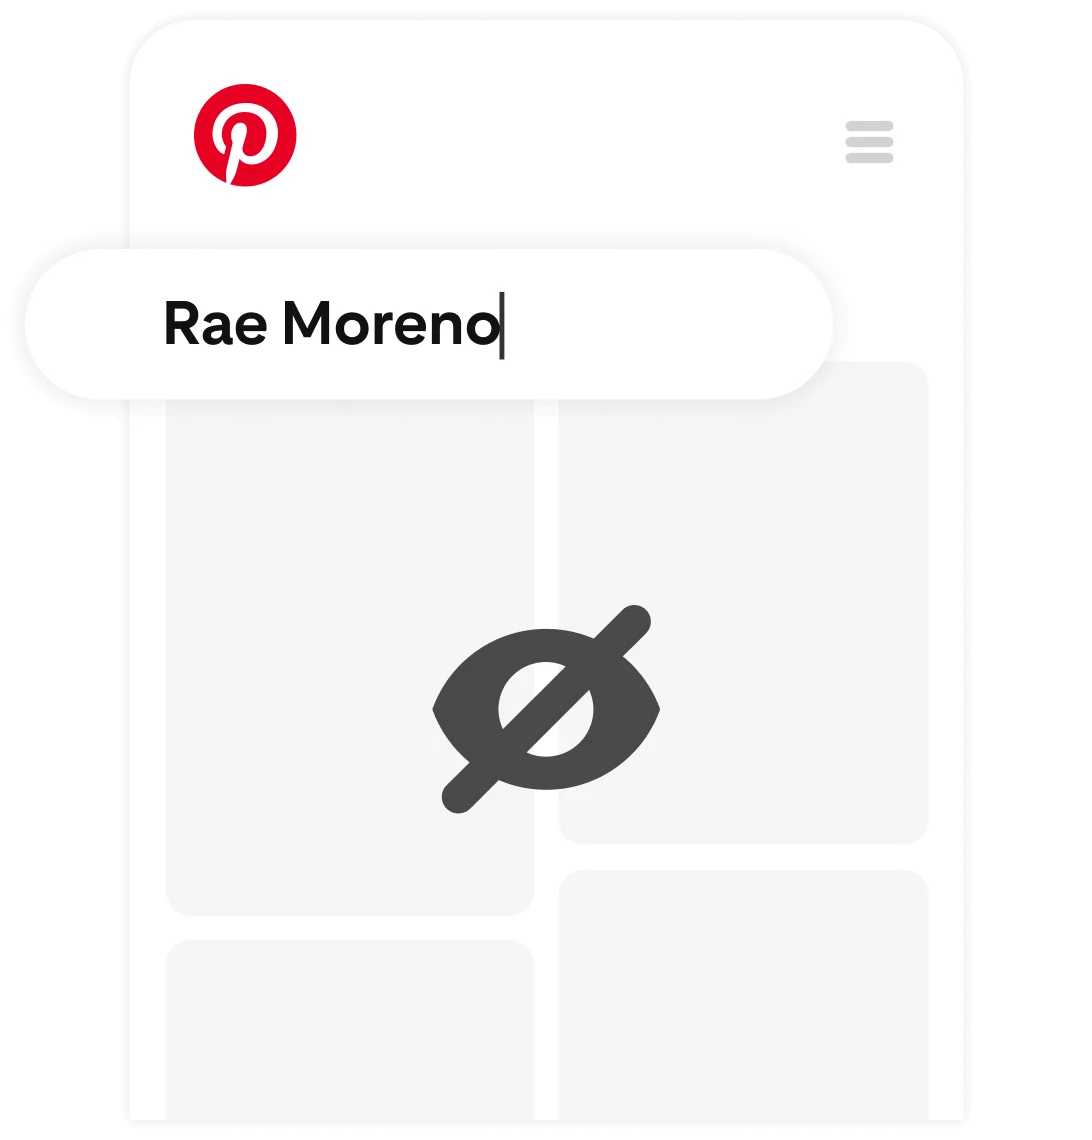 A private Pinterest feed with the name "Rae Moreno" typed in the search bar.